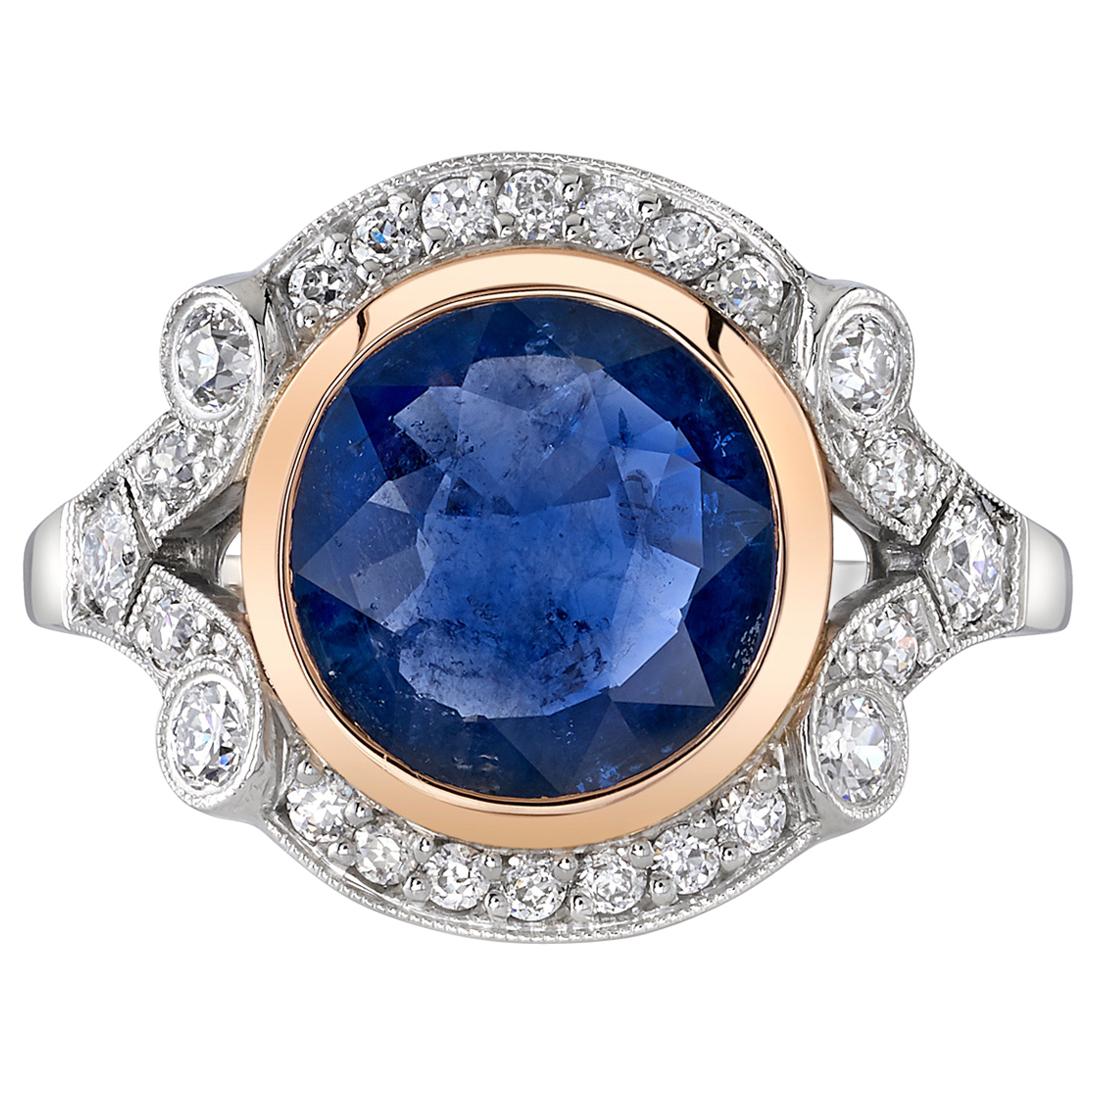 2.77 Carat Round Cut Blue Sapphire Set in a Rose Gold and Platinum Mounting.